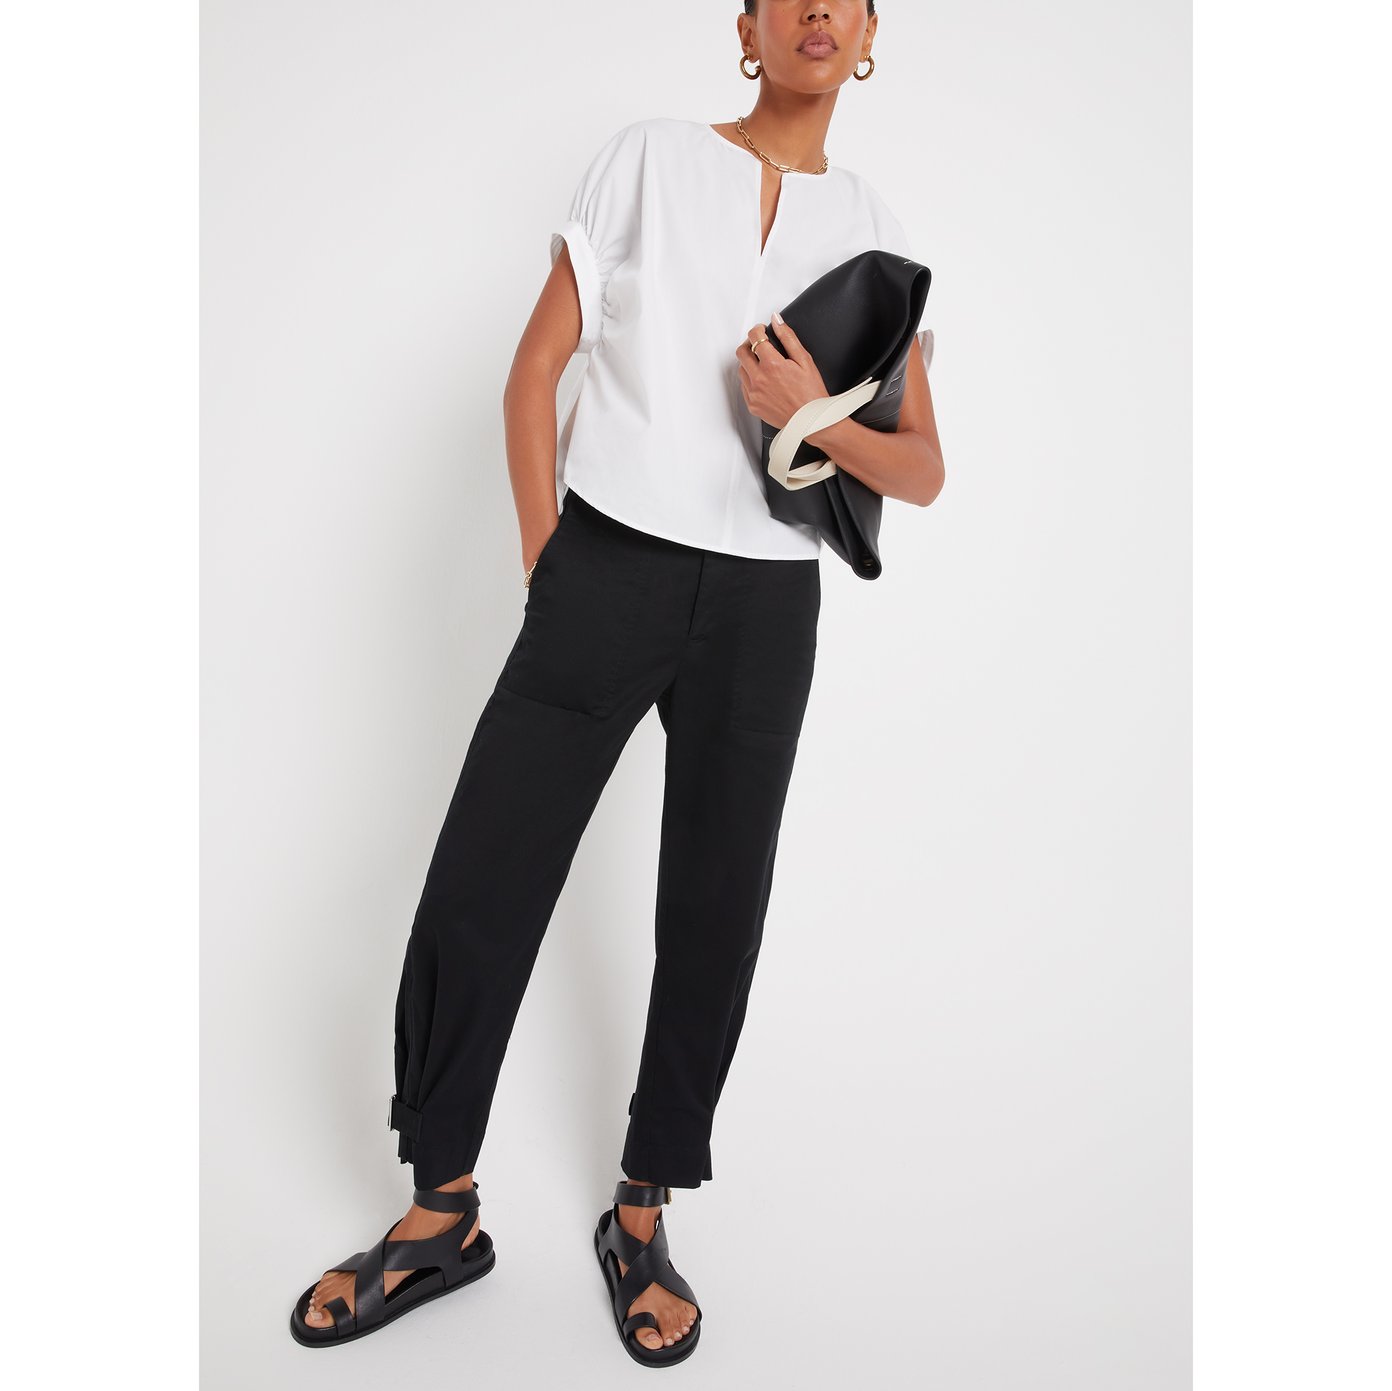 Proenza Schouler White Label Cotton Twill Tapered Pants | goop